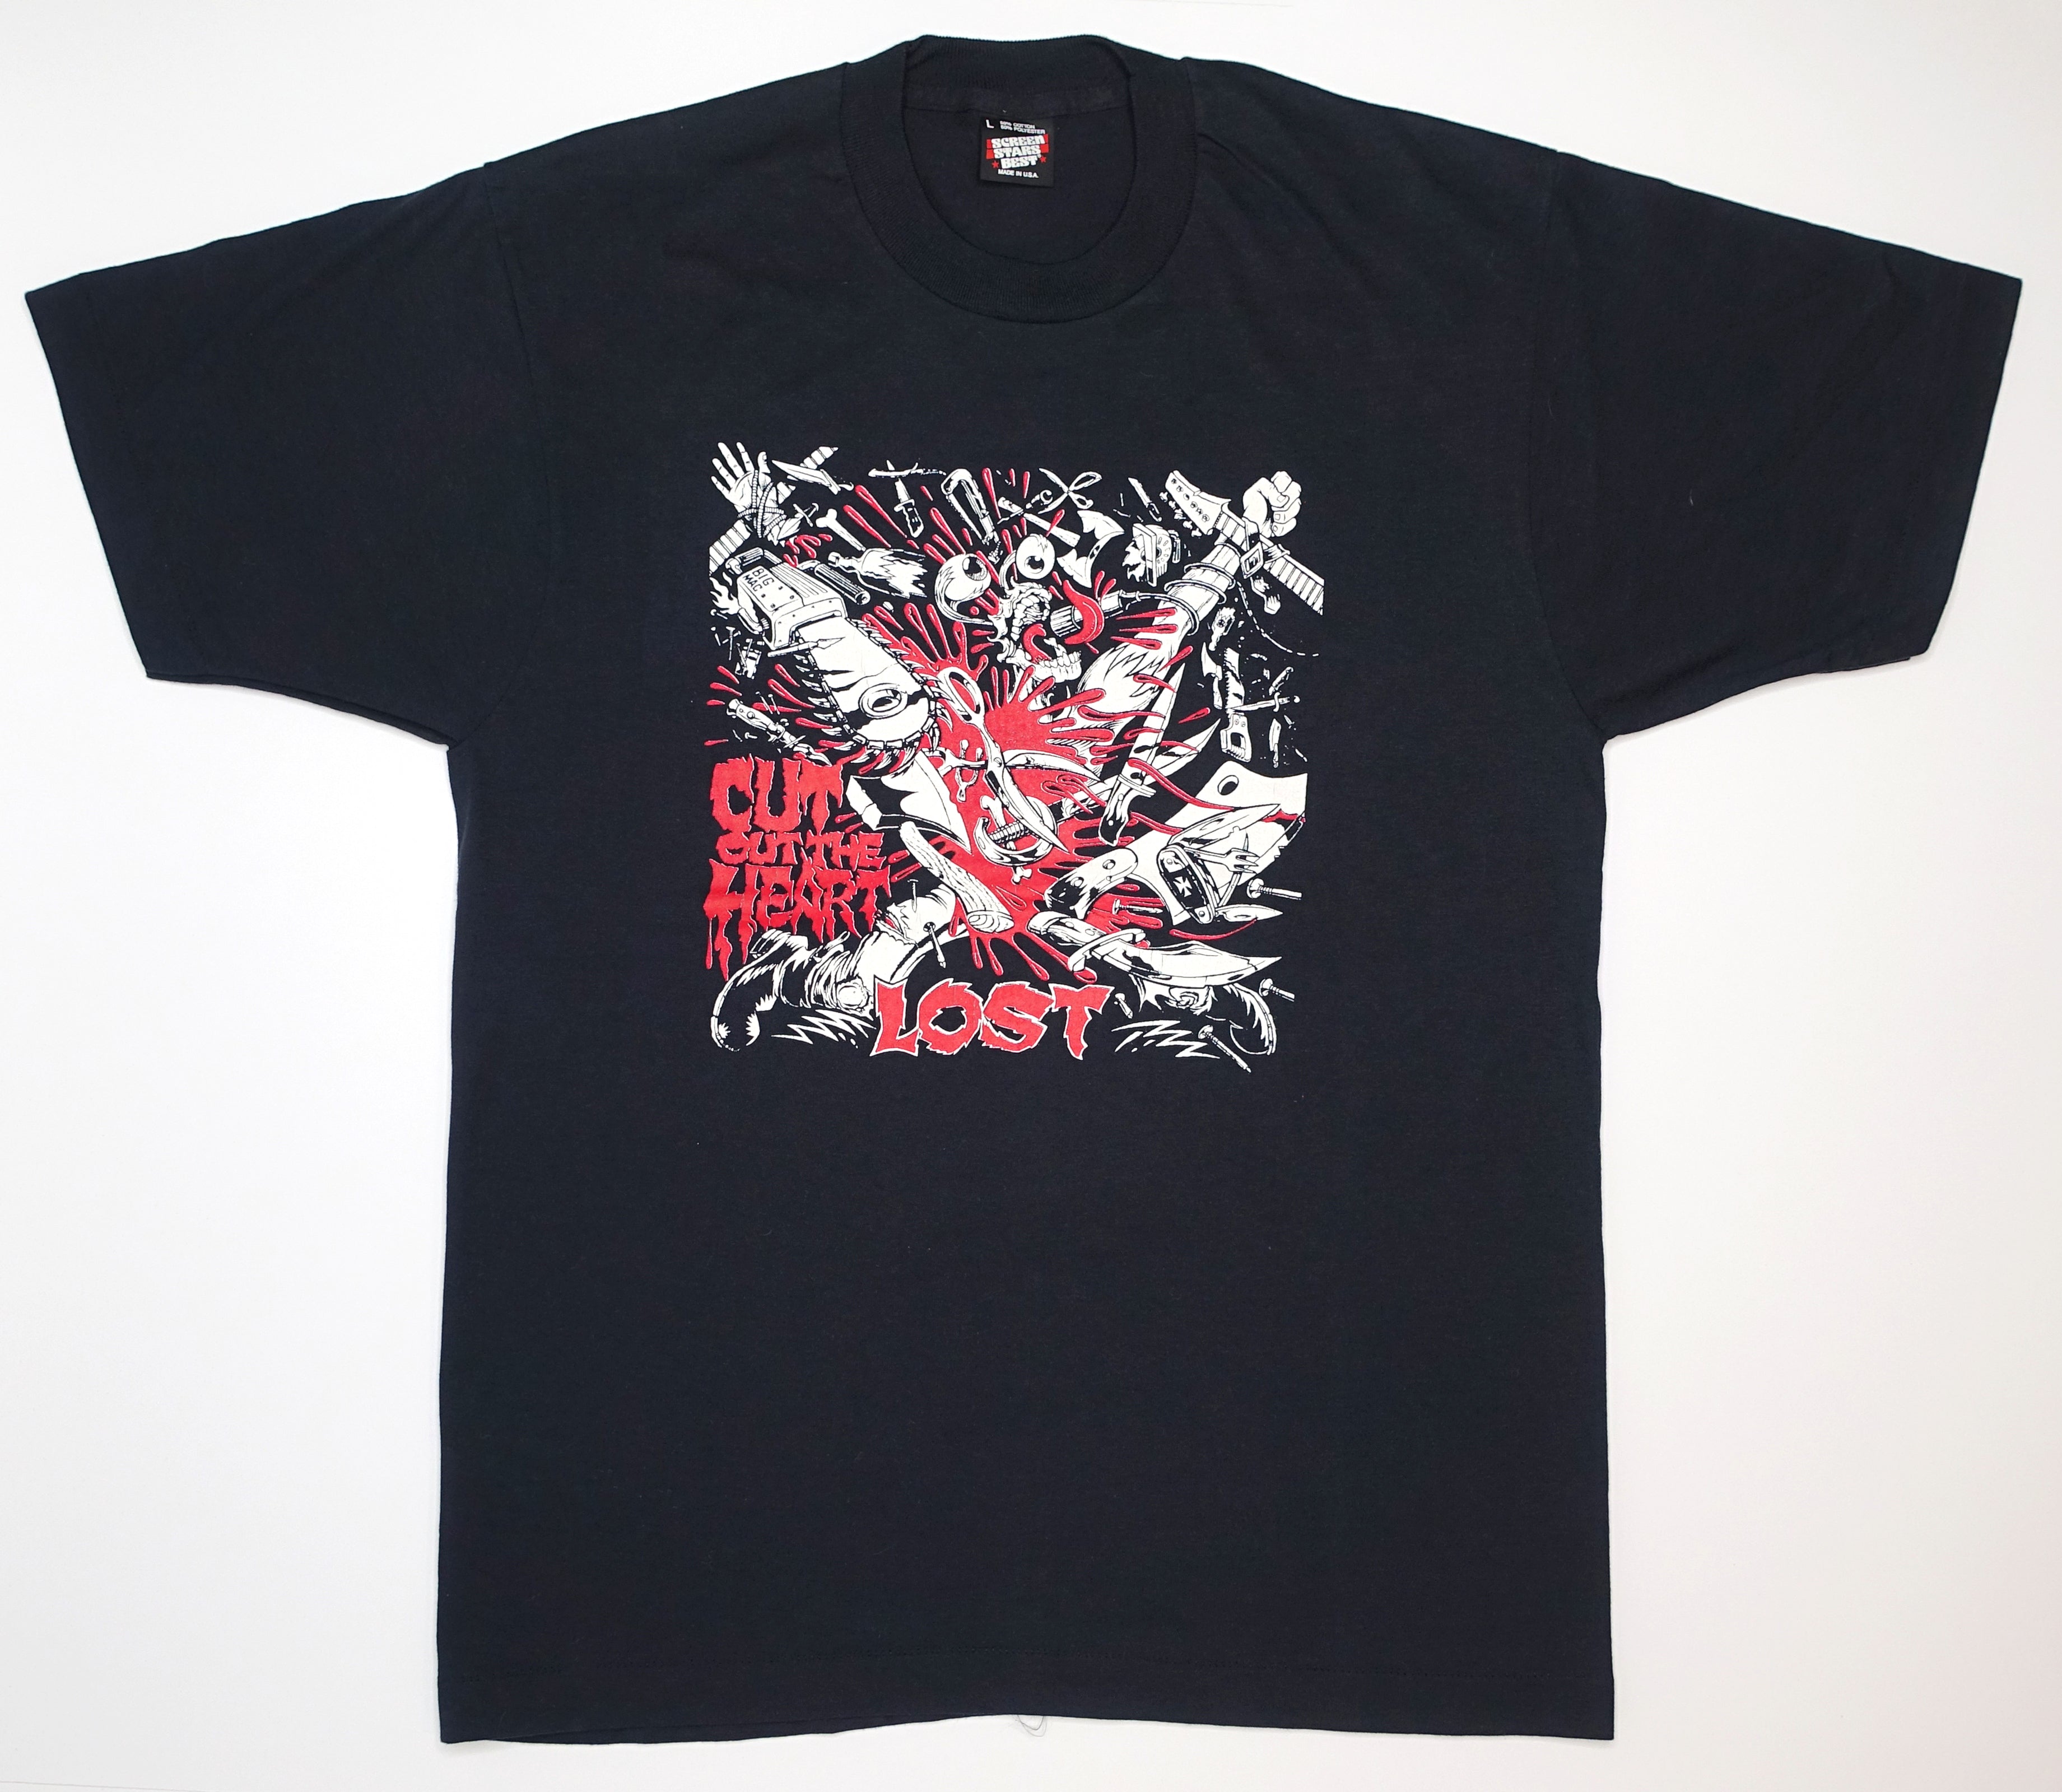 Lost ‎– Cut Out The Heart 1990 Tour Shirt Size Large